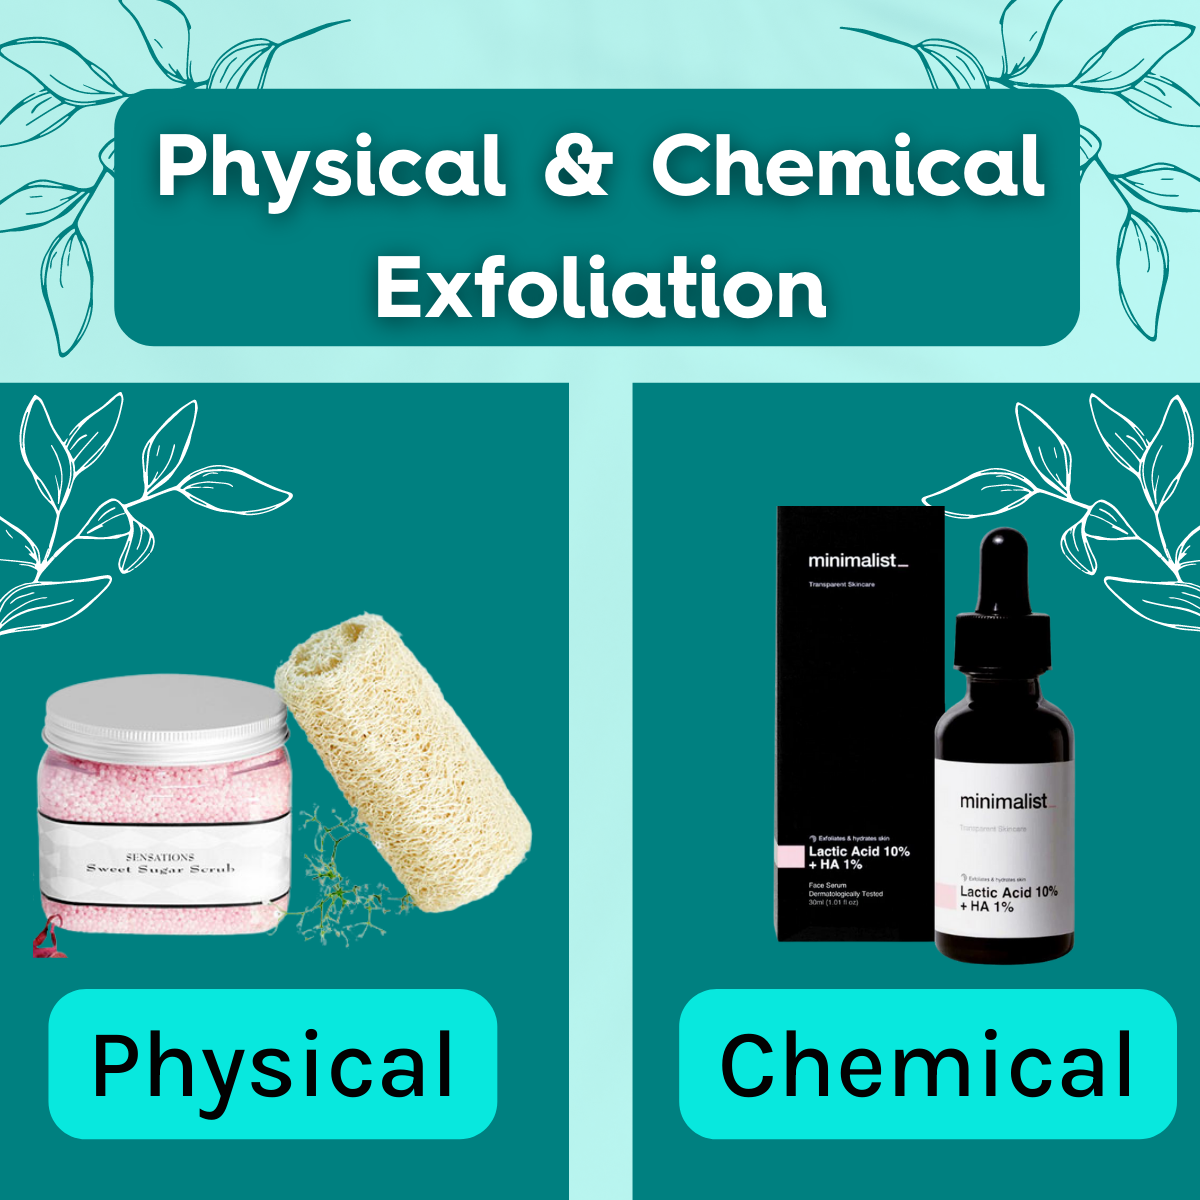 Physical and Chemical Exfoliation